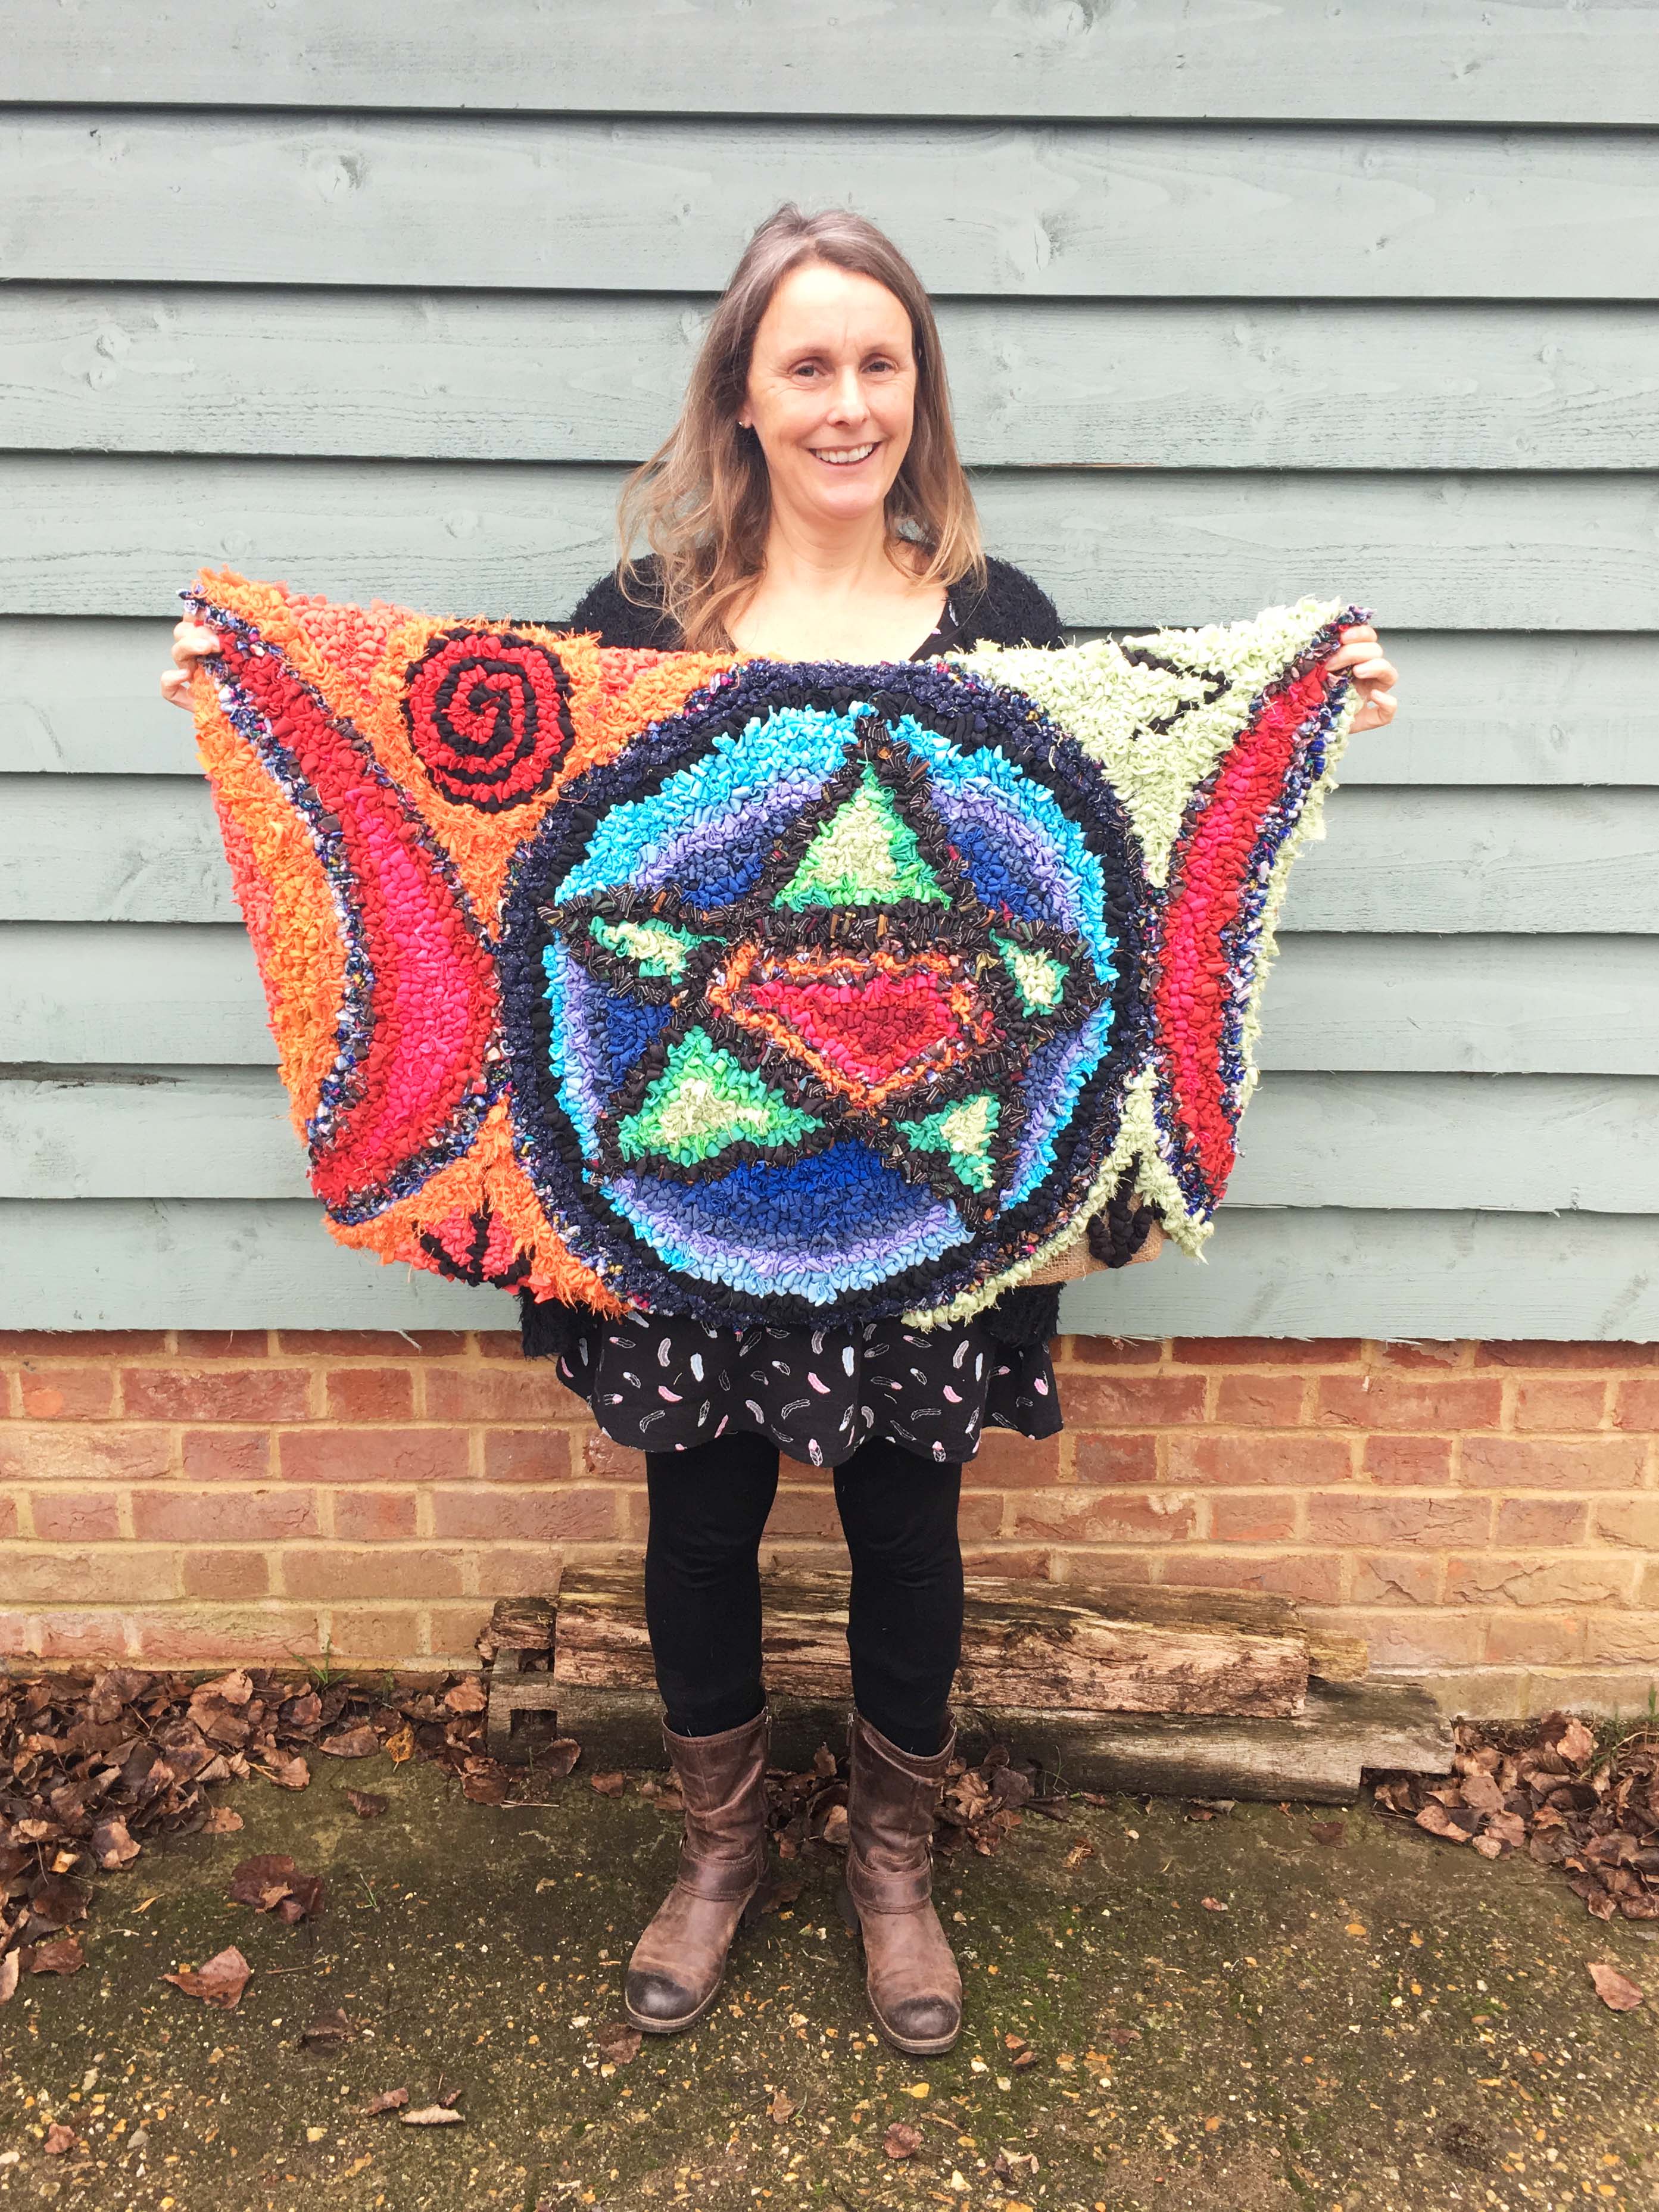 Artistic Colourful Rag Rug with Star Design